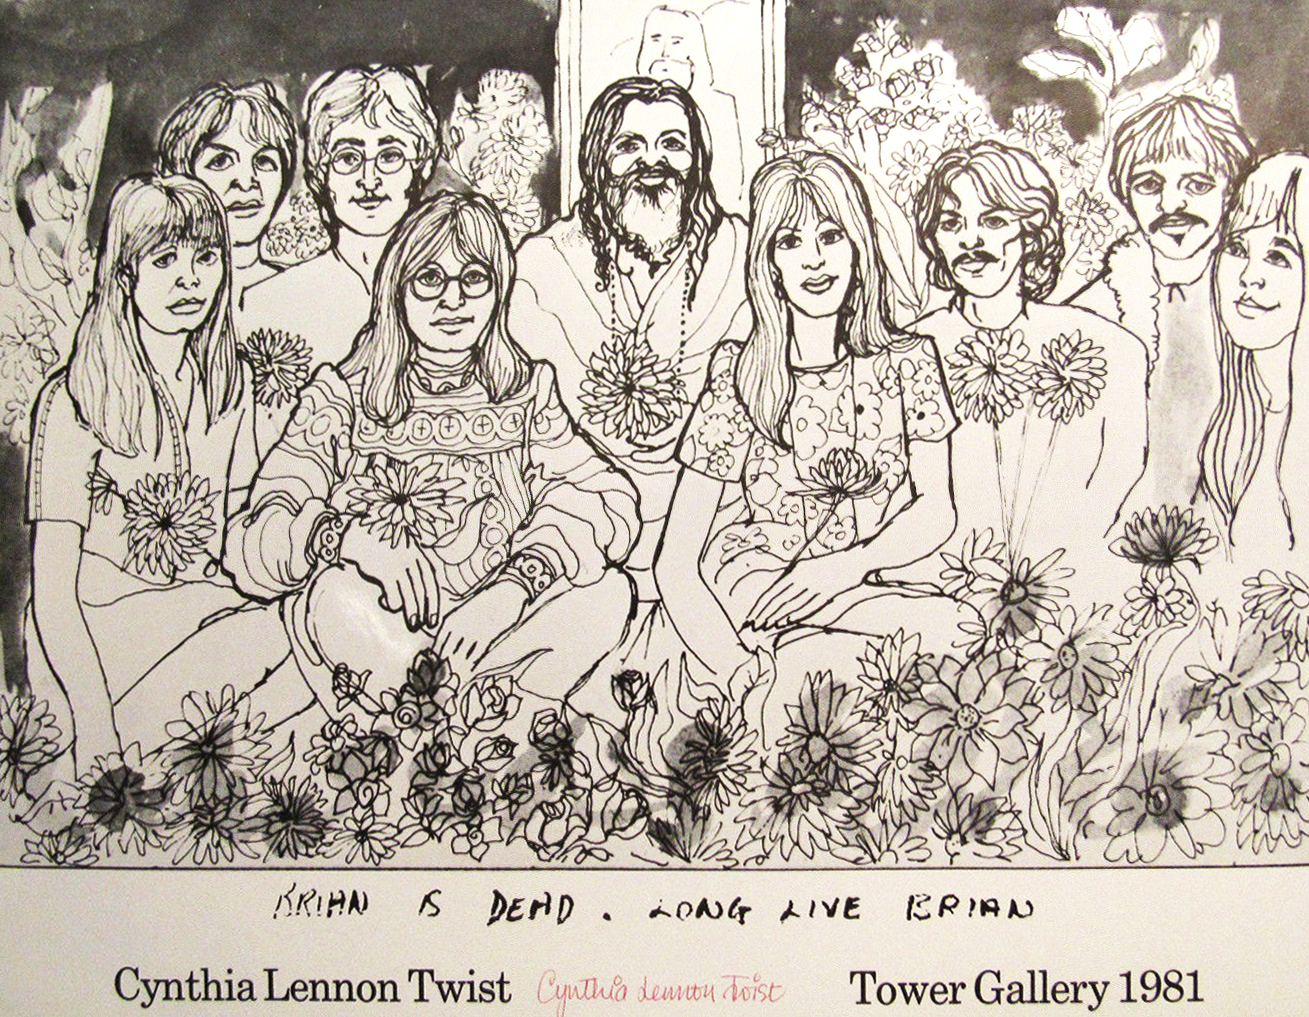 Drawing done by Cynthia of the gang in 1967.